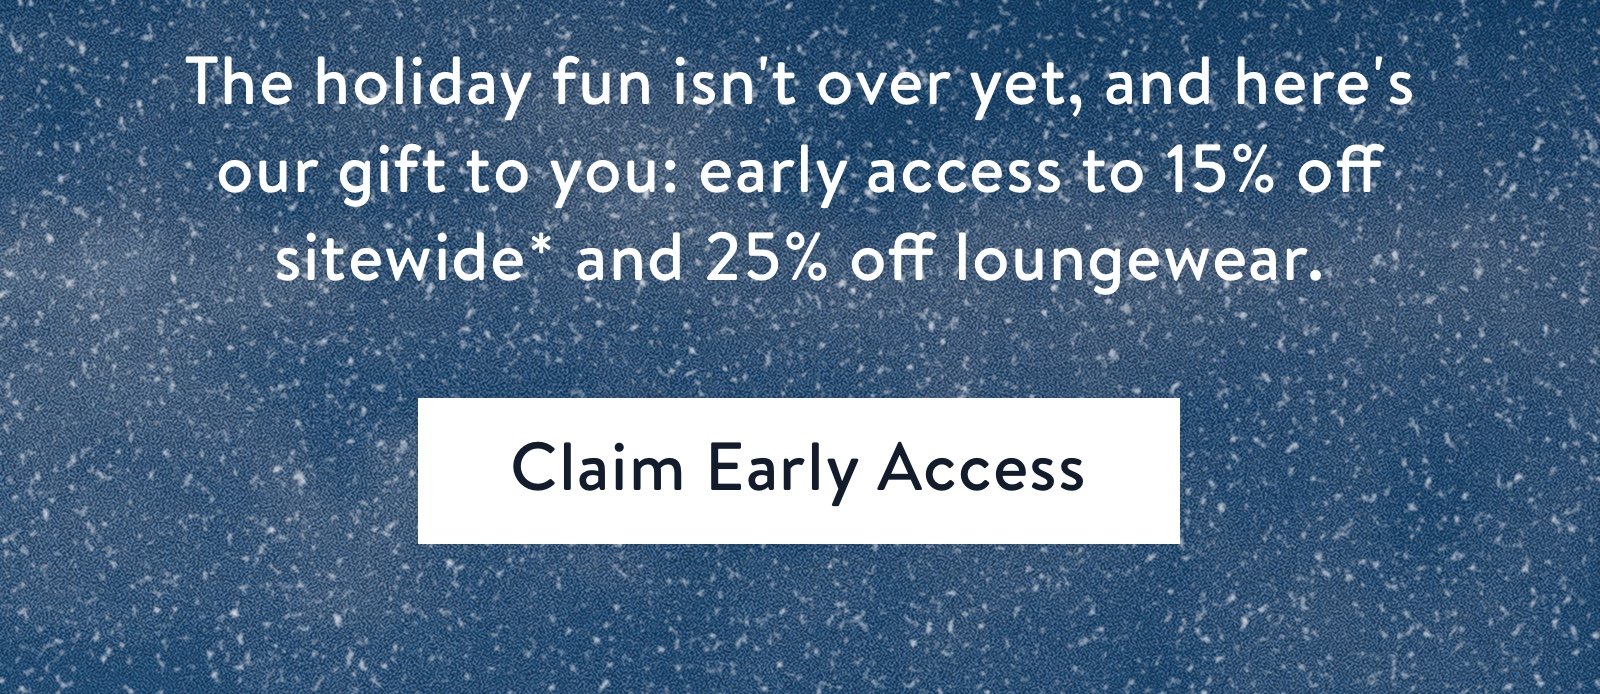 The holiday fun isn''t over yet, and here''s our gift to you: early access to 15% off sitewide* and 25% off loungewear.